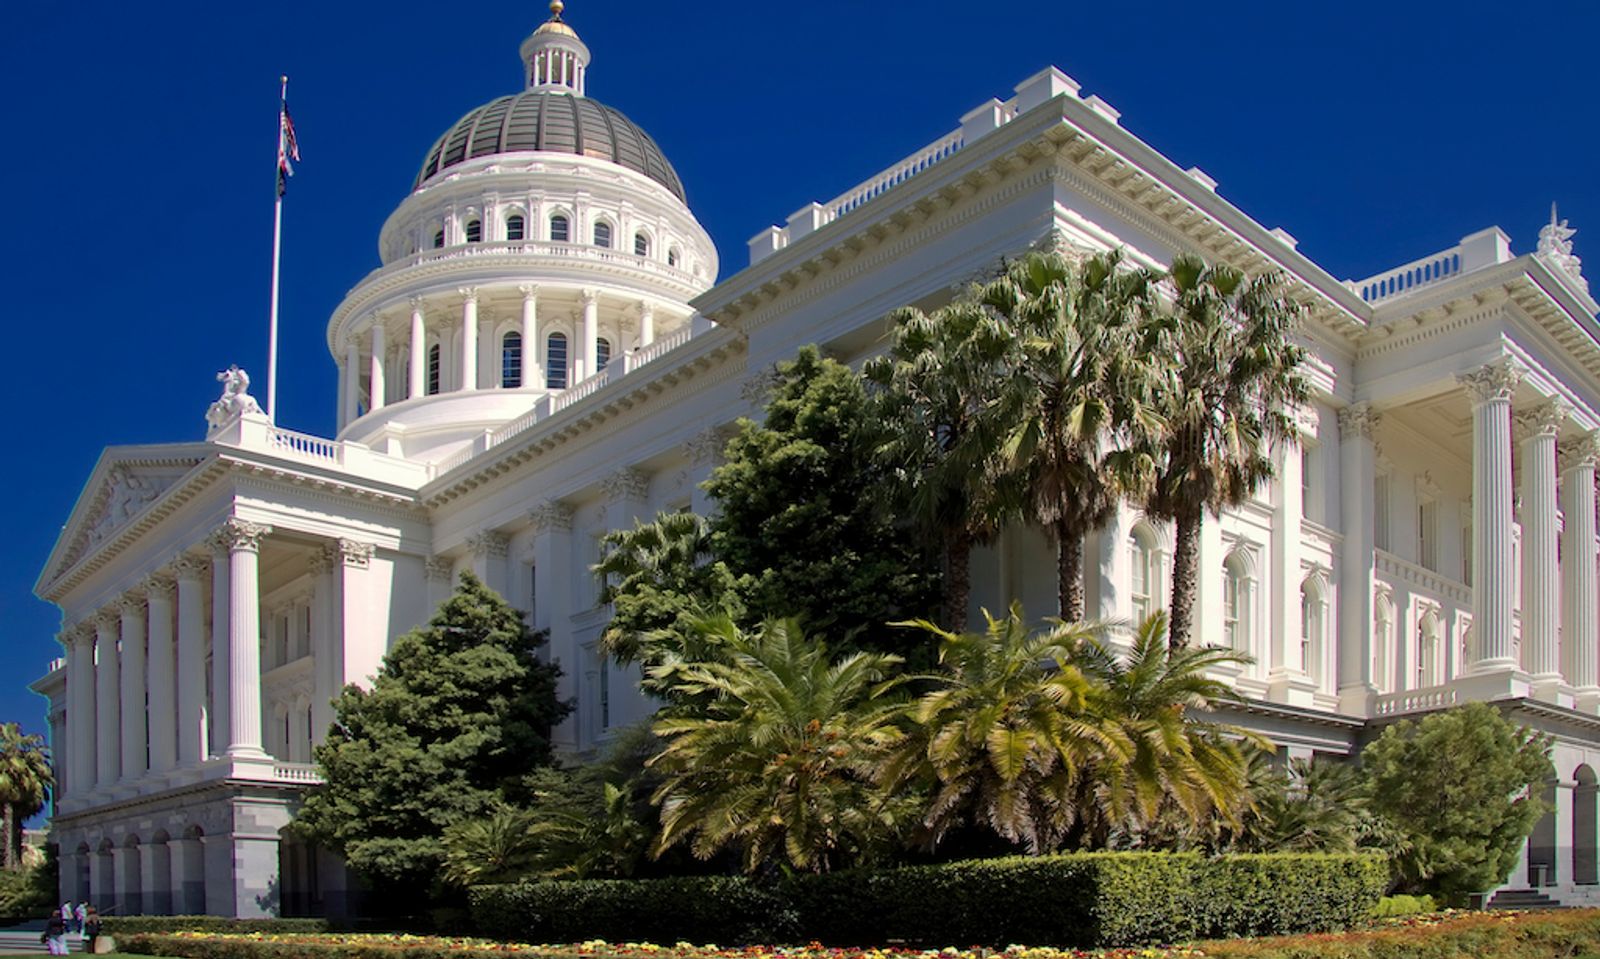 California Senate Committee OKs Exemptions to AB5 Gig Worker Law